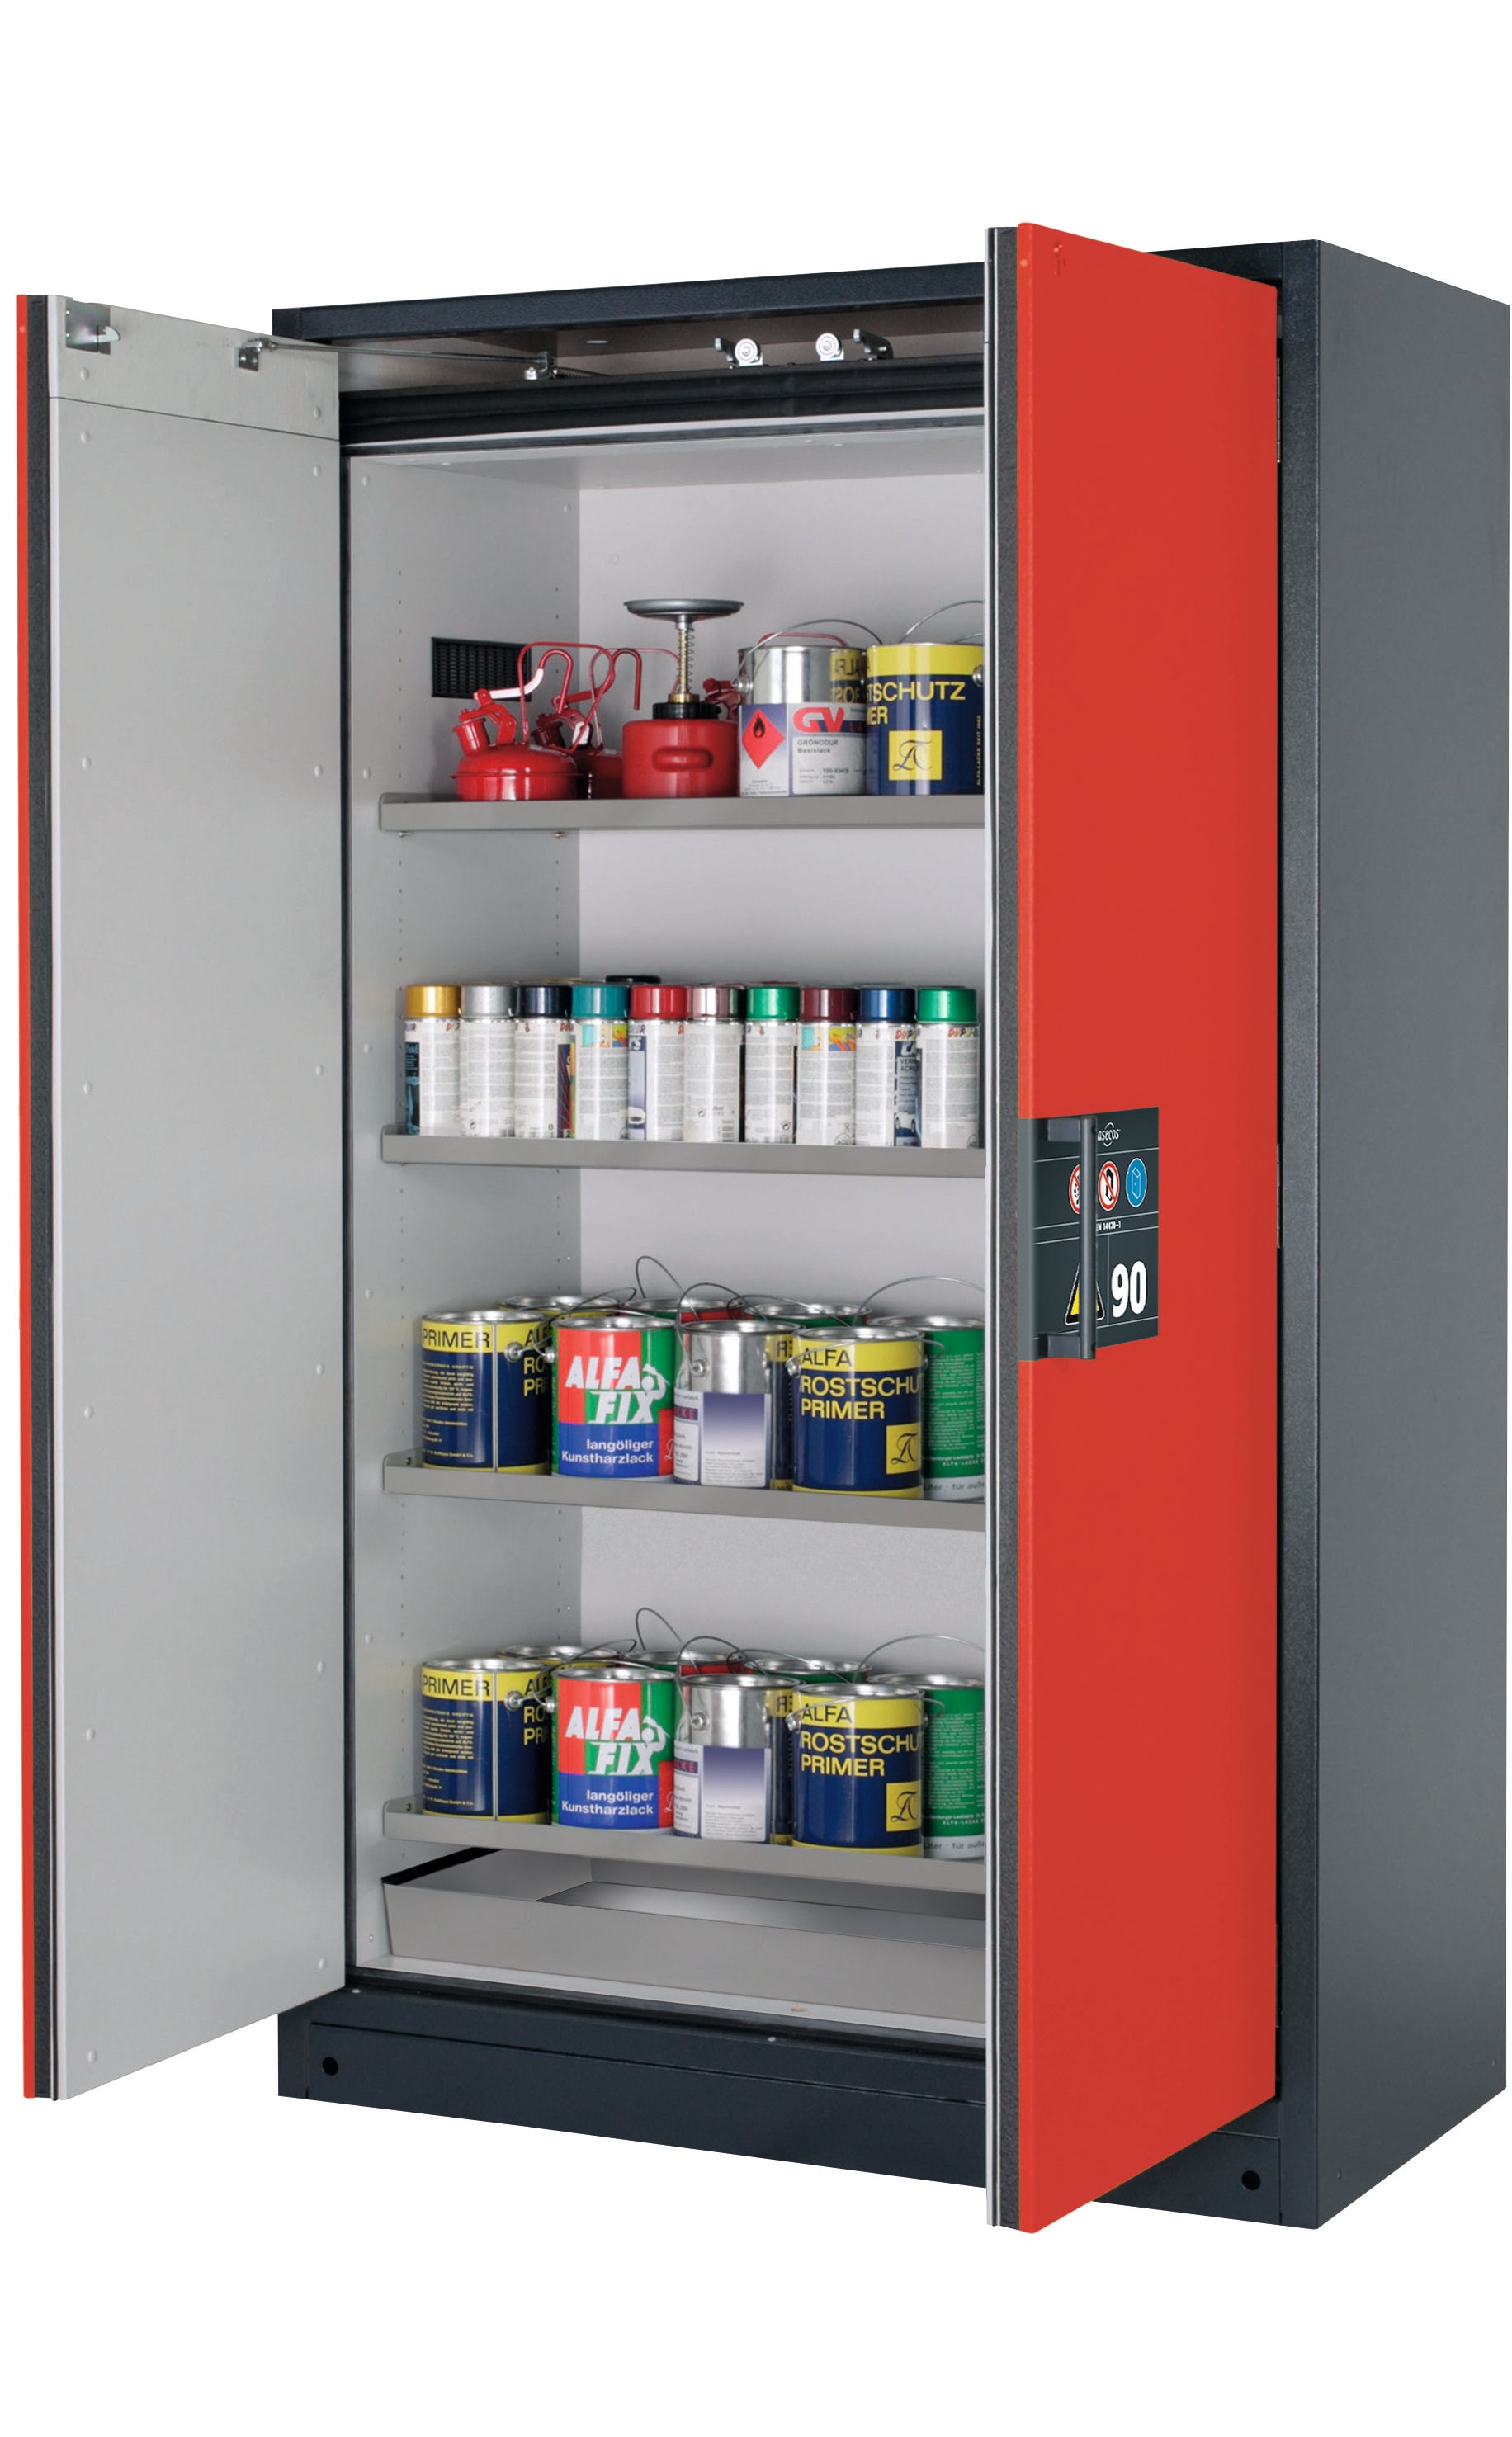 Type 90 safety storage cabinet Q-CLASSIC-90 model Q90.195.120 in traffic red RAL 3020 with 4x shelf standard (stainless steel 1.4301),